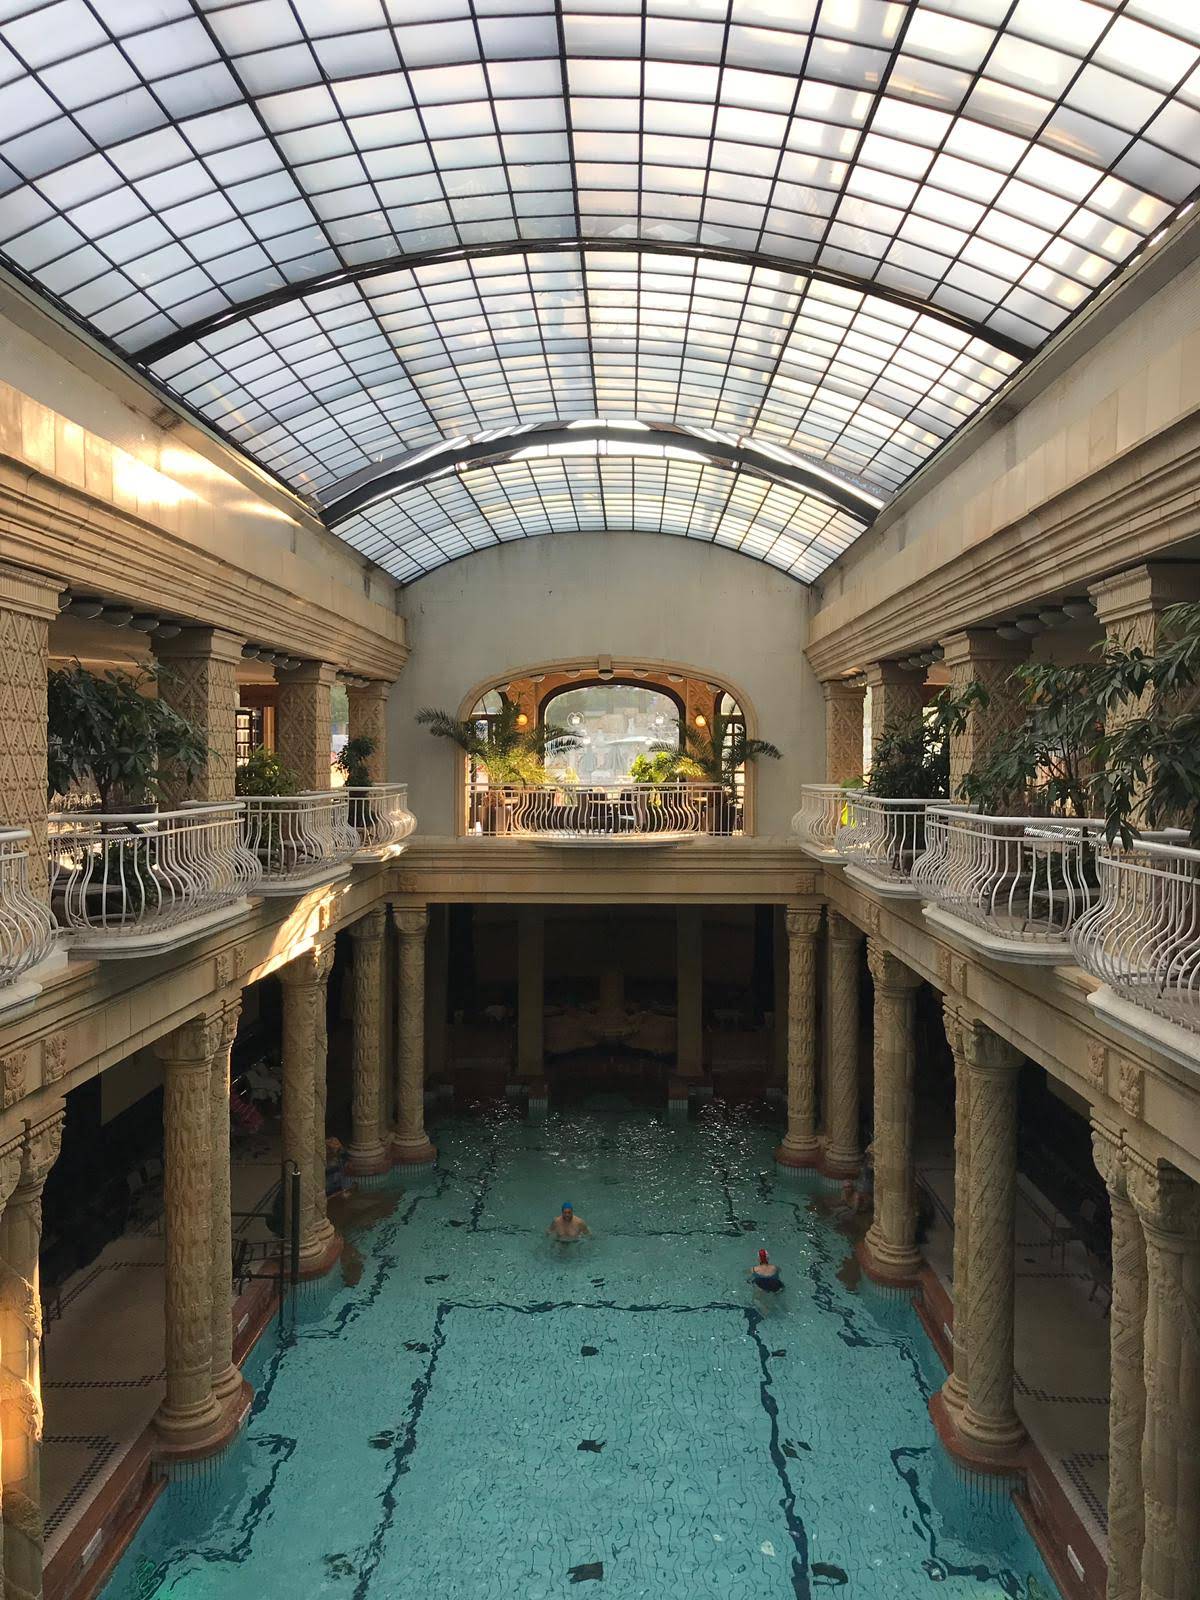 No. 104. The Grand Budapest Bath-House in the Gellert Hotel